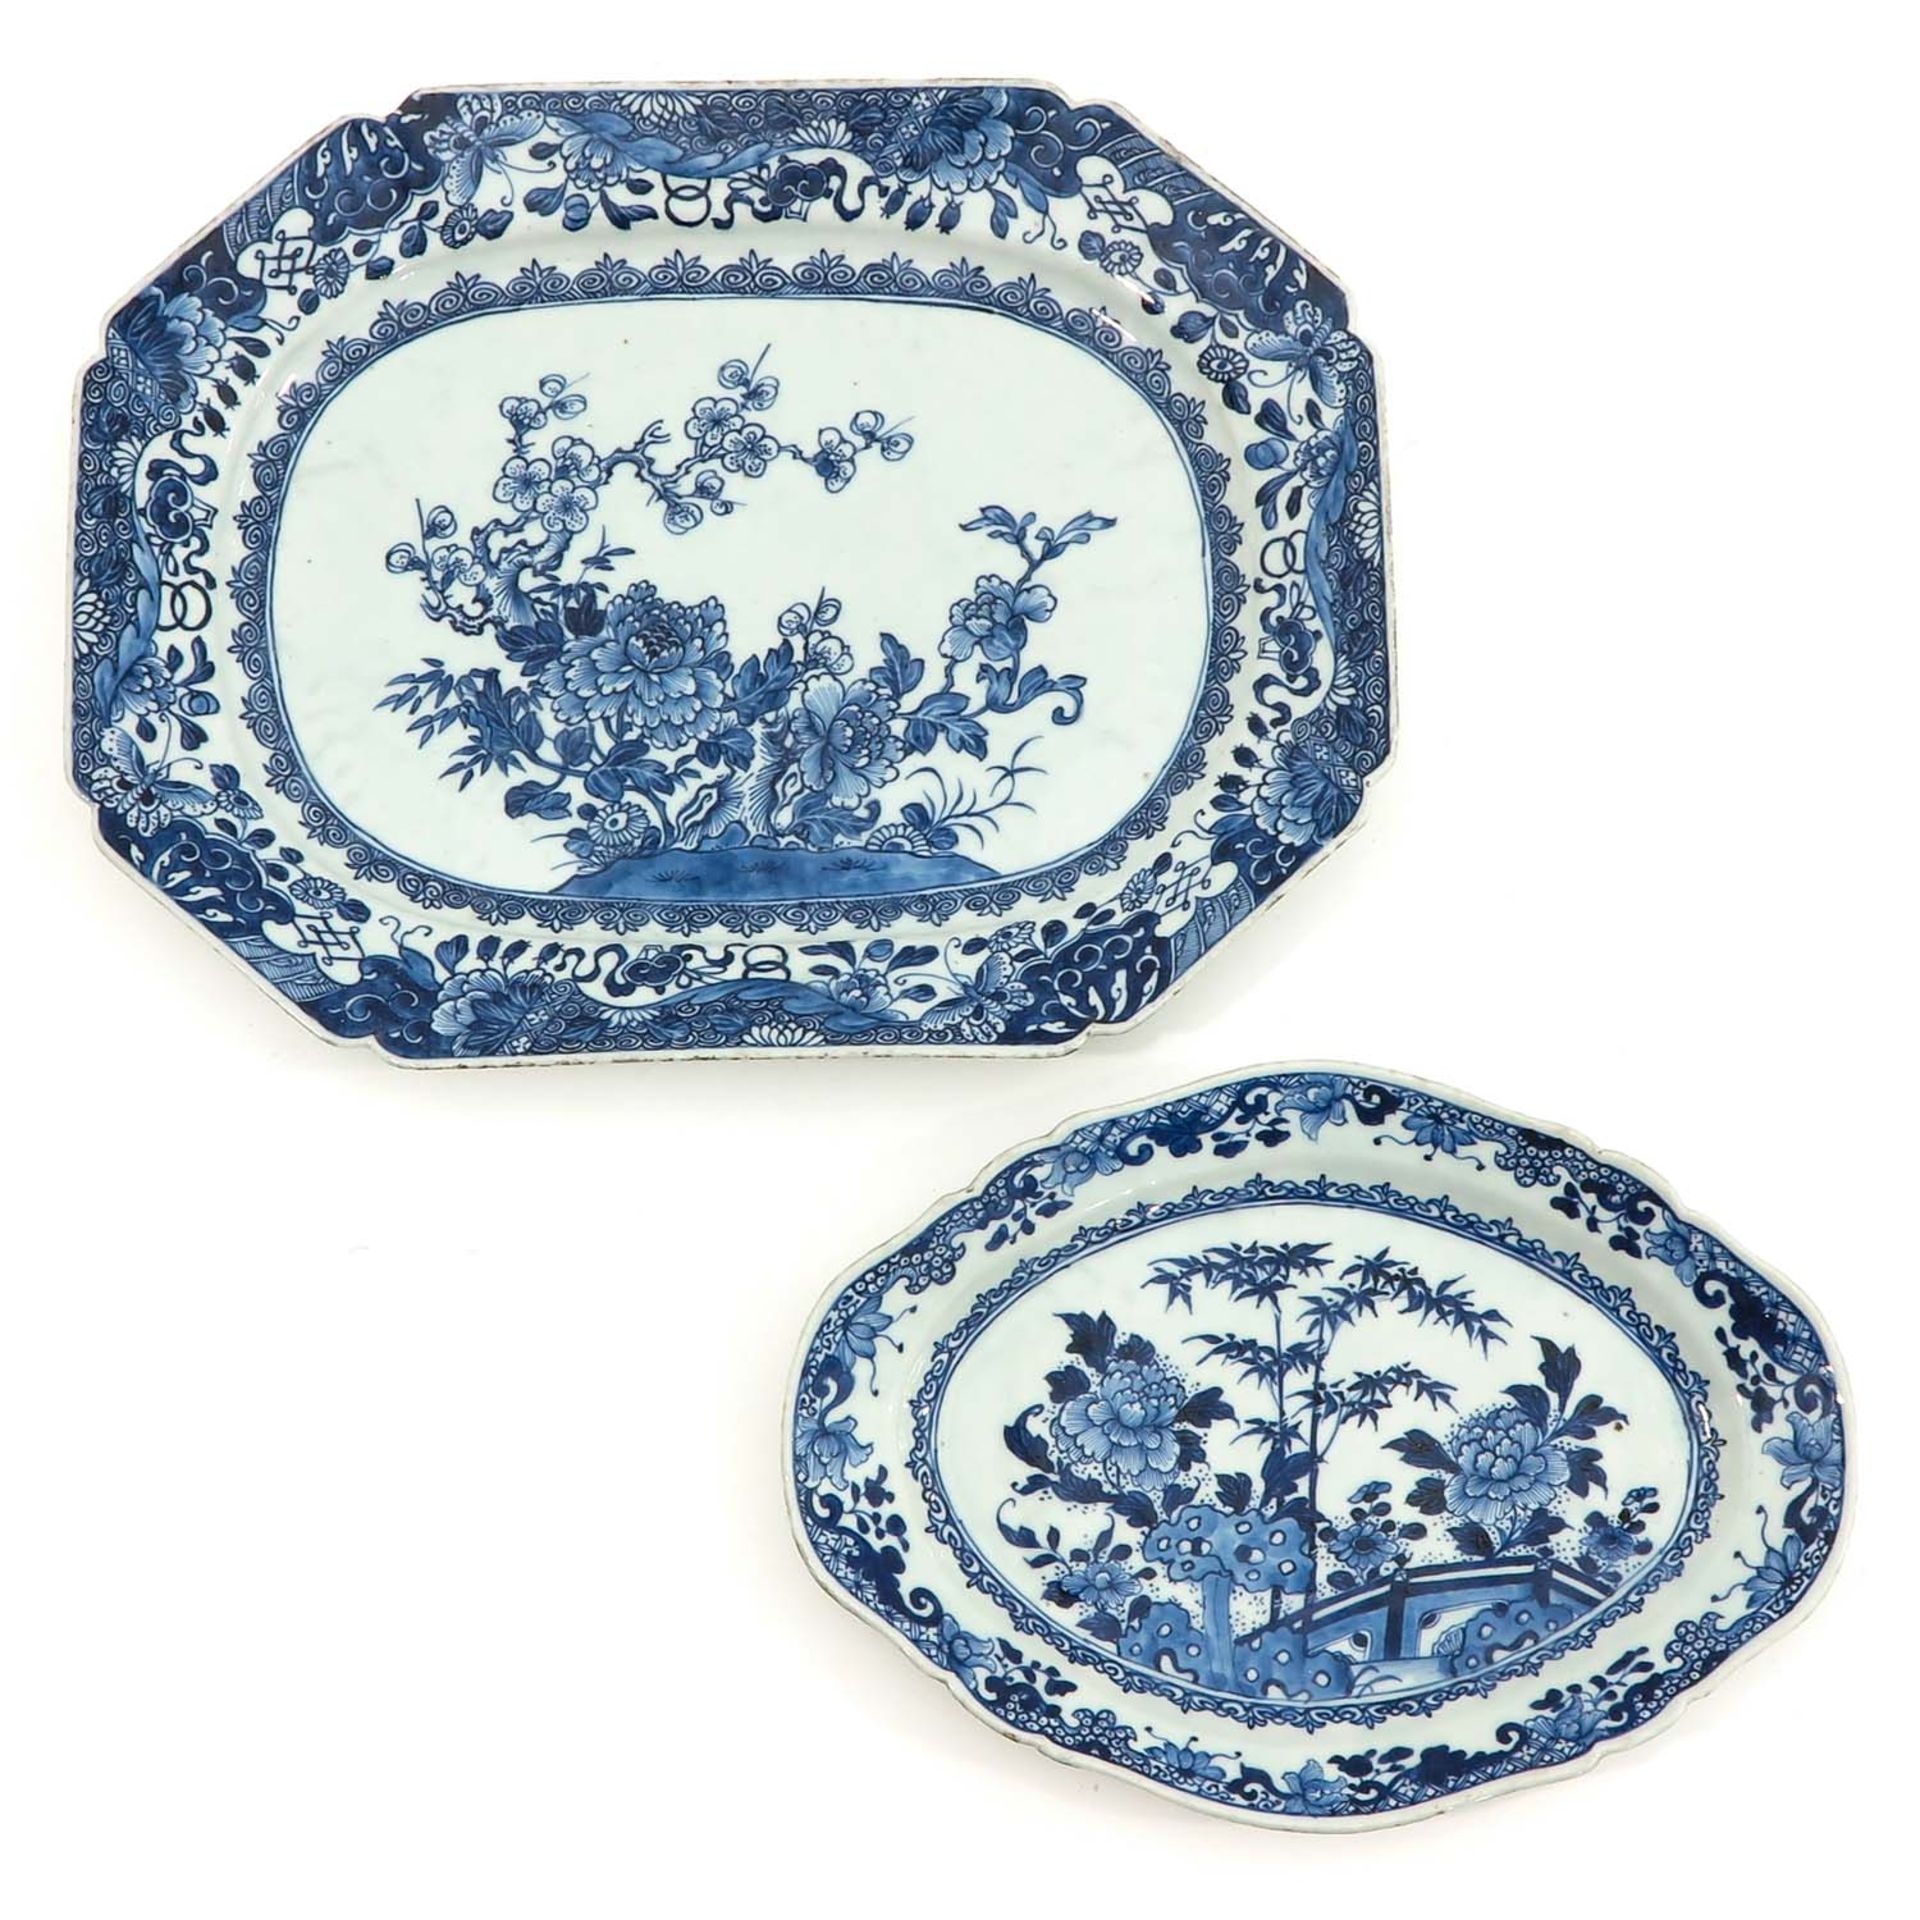 A Lot of 2 Blue and White Serving Trays